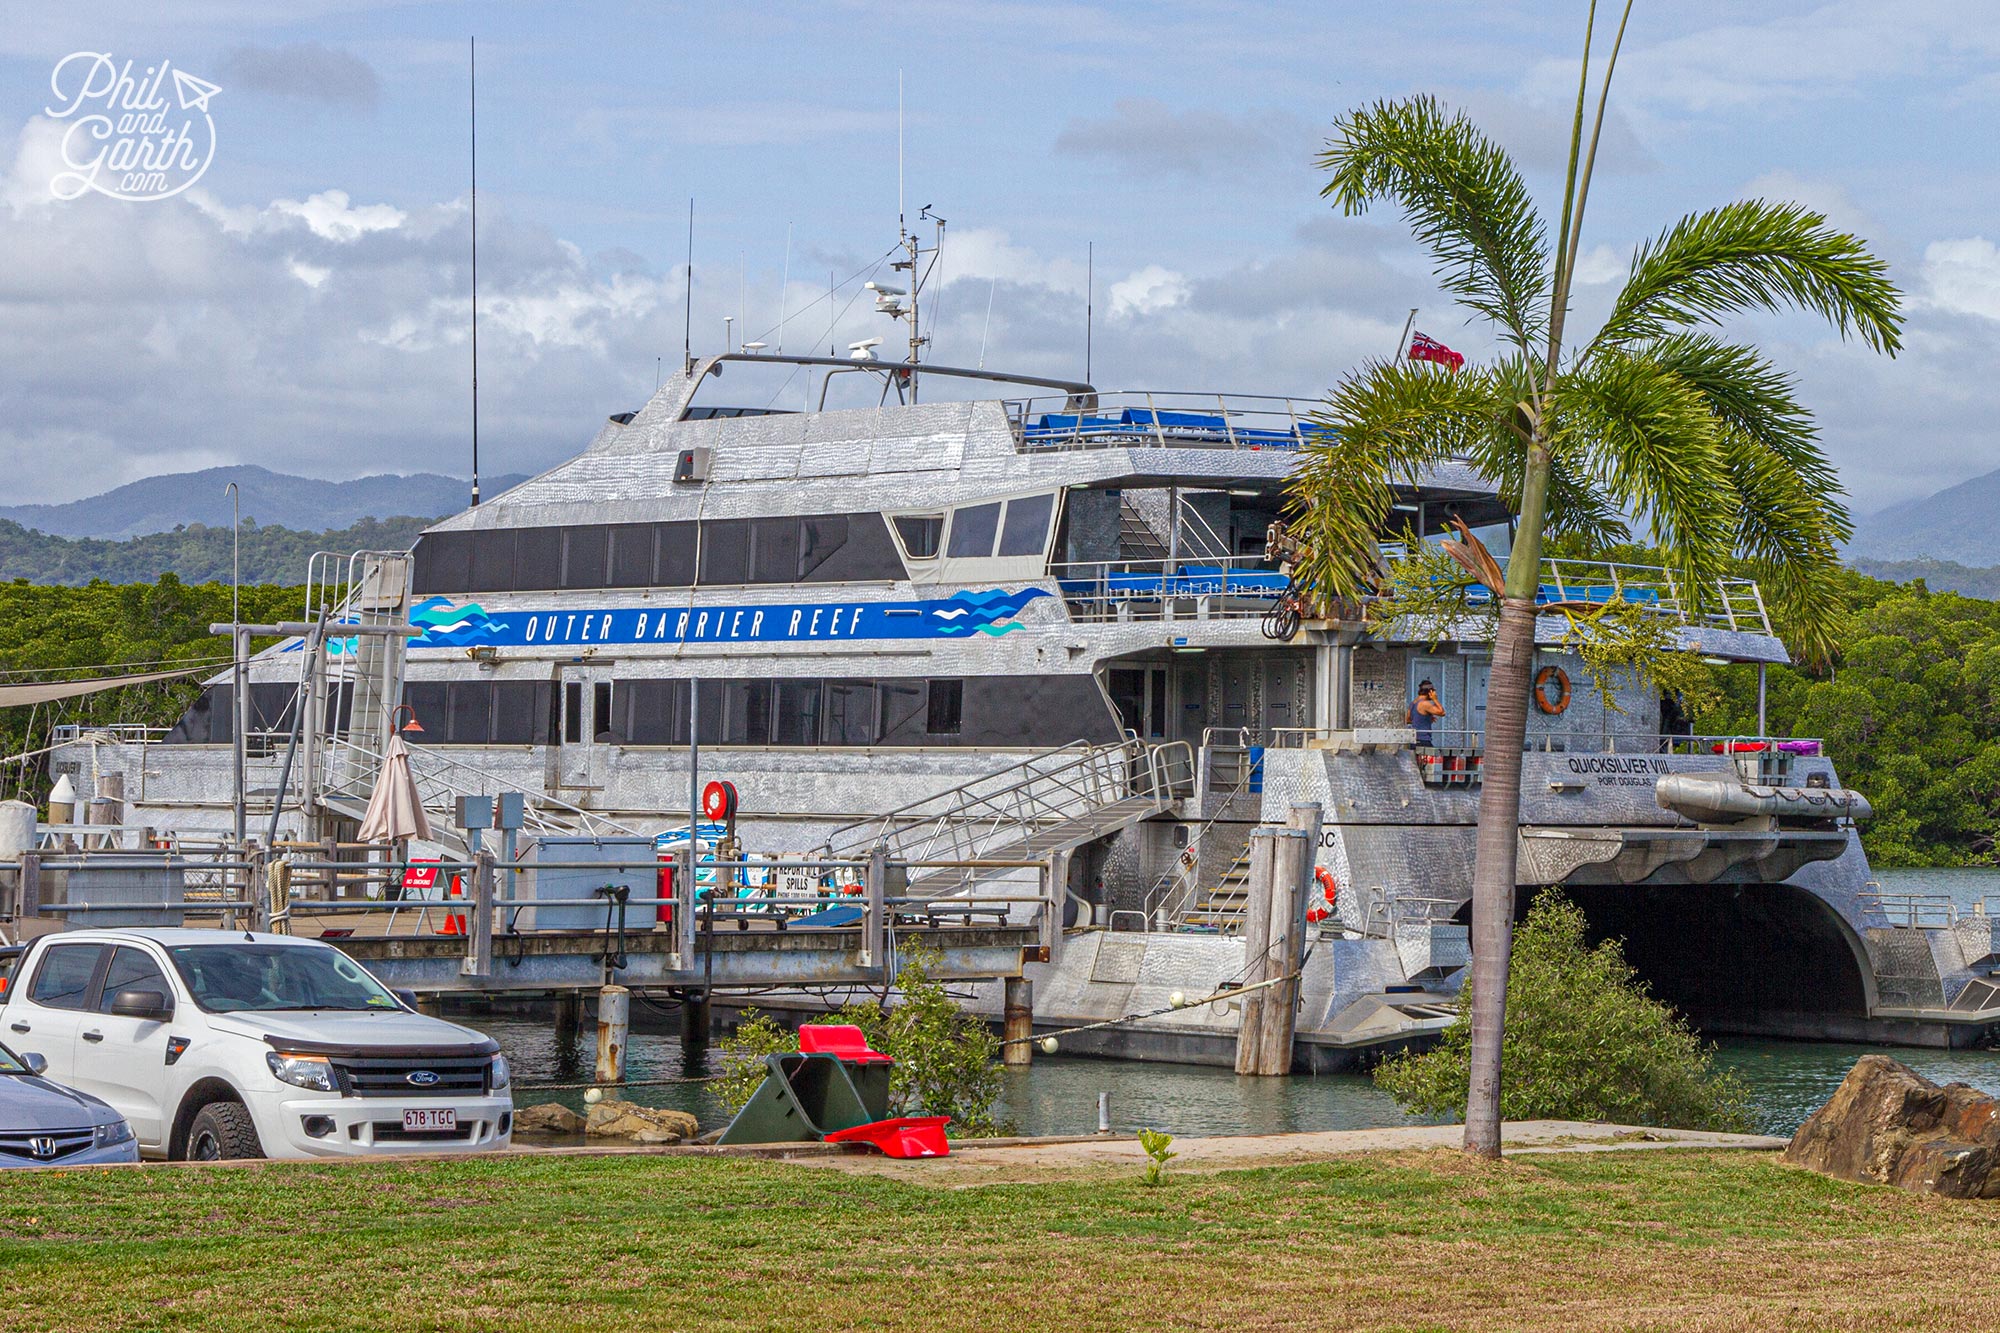 Our giant sized catamaran for the day to the Great Barrier Reef